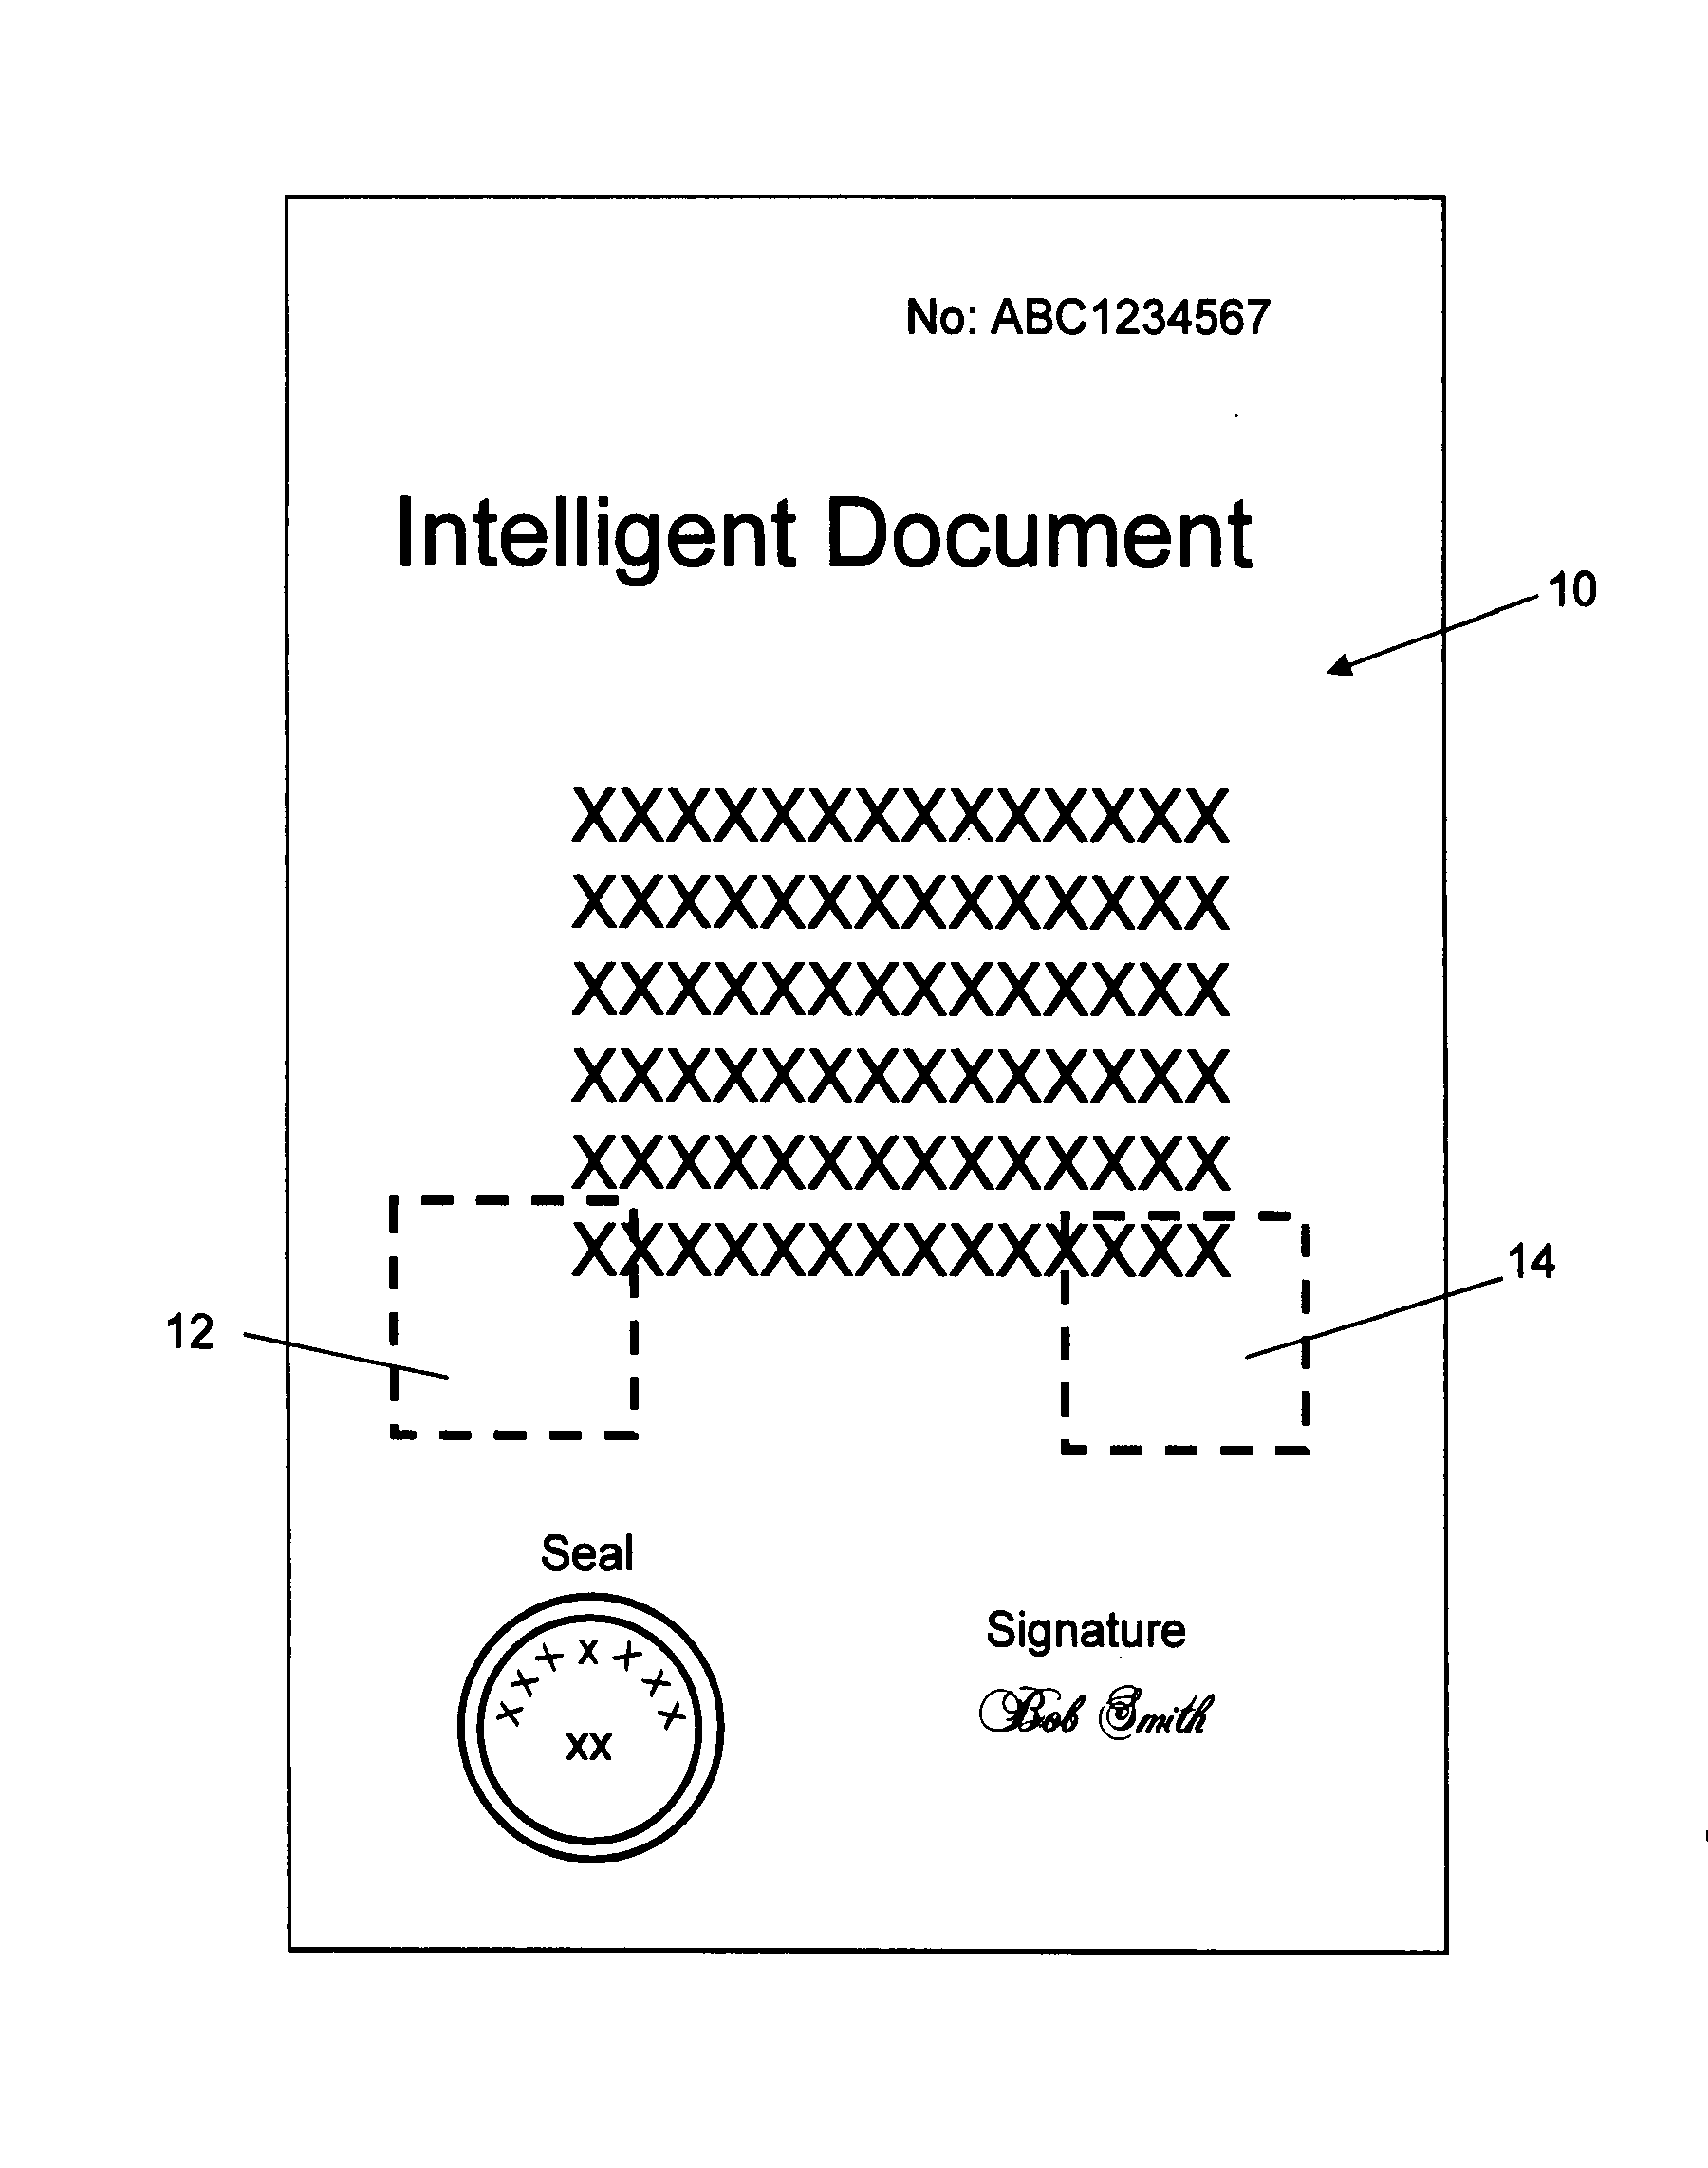 Intelligent document with stored text and image